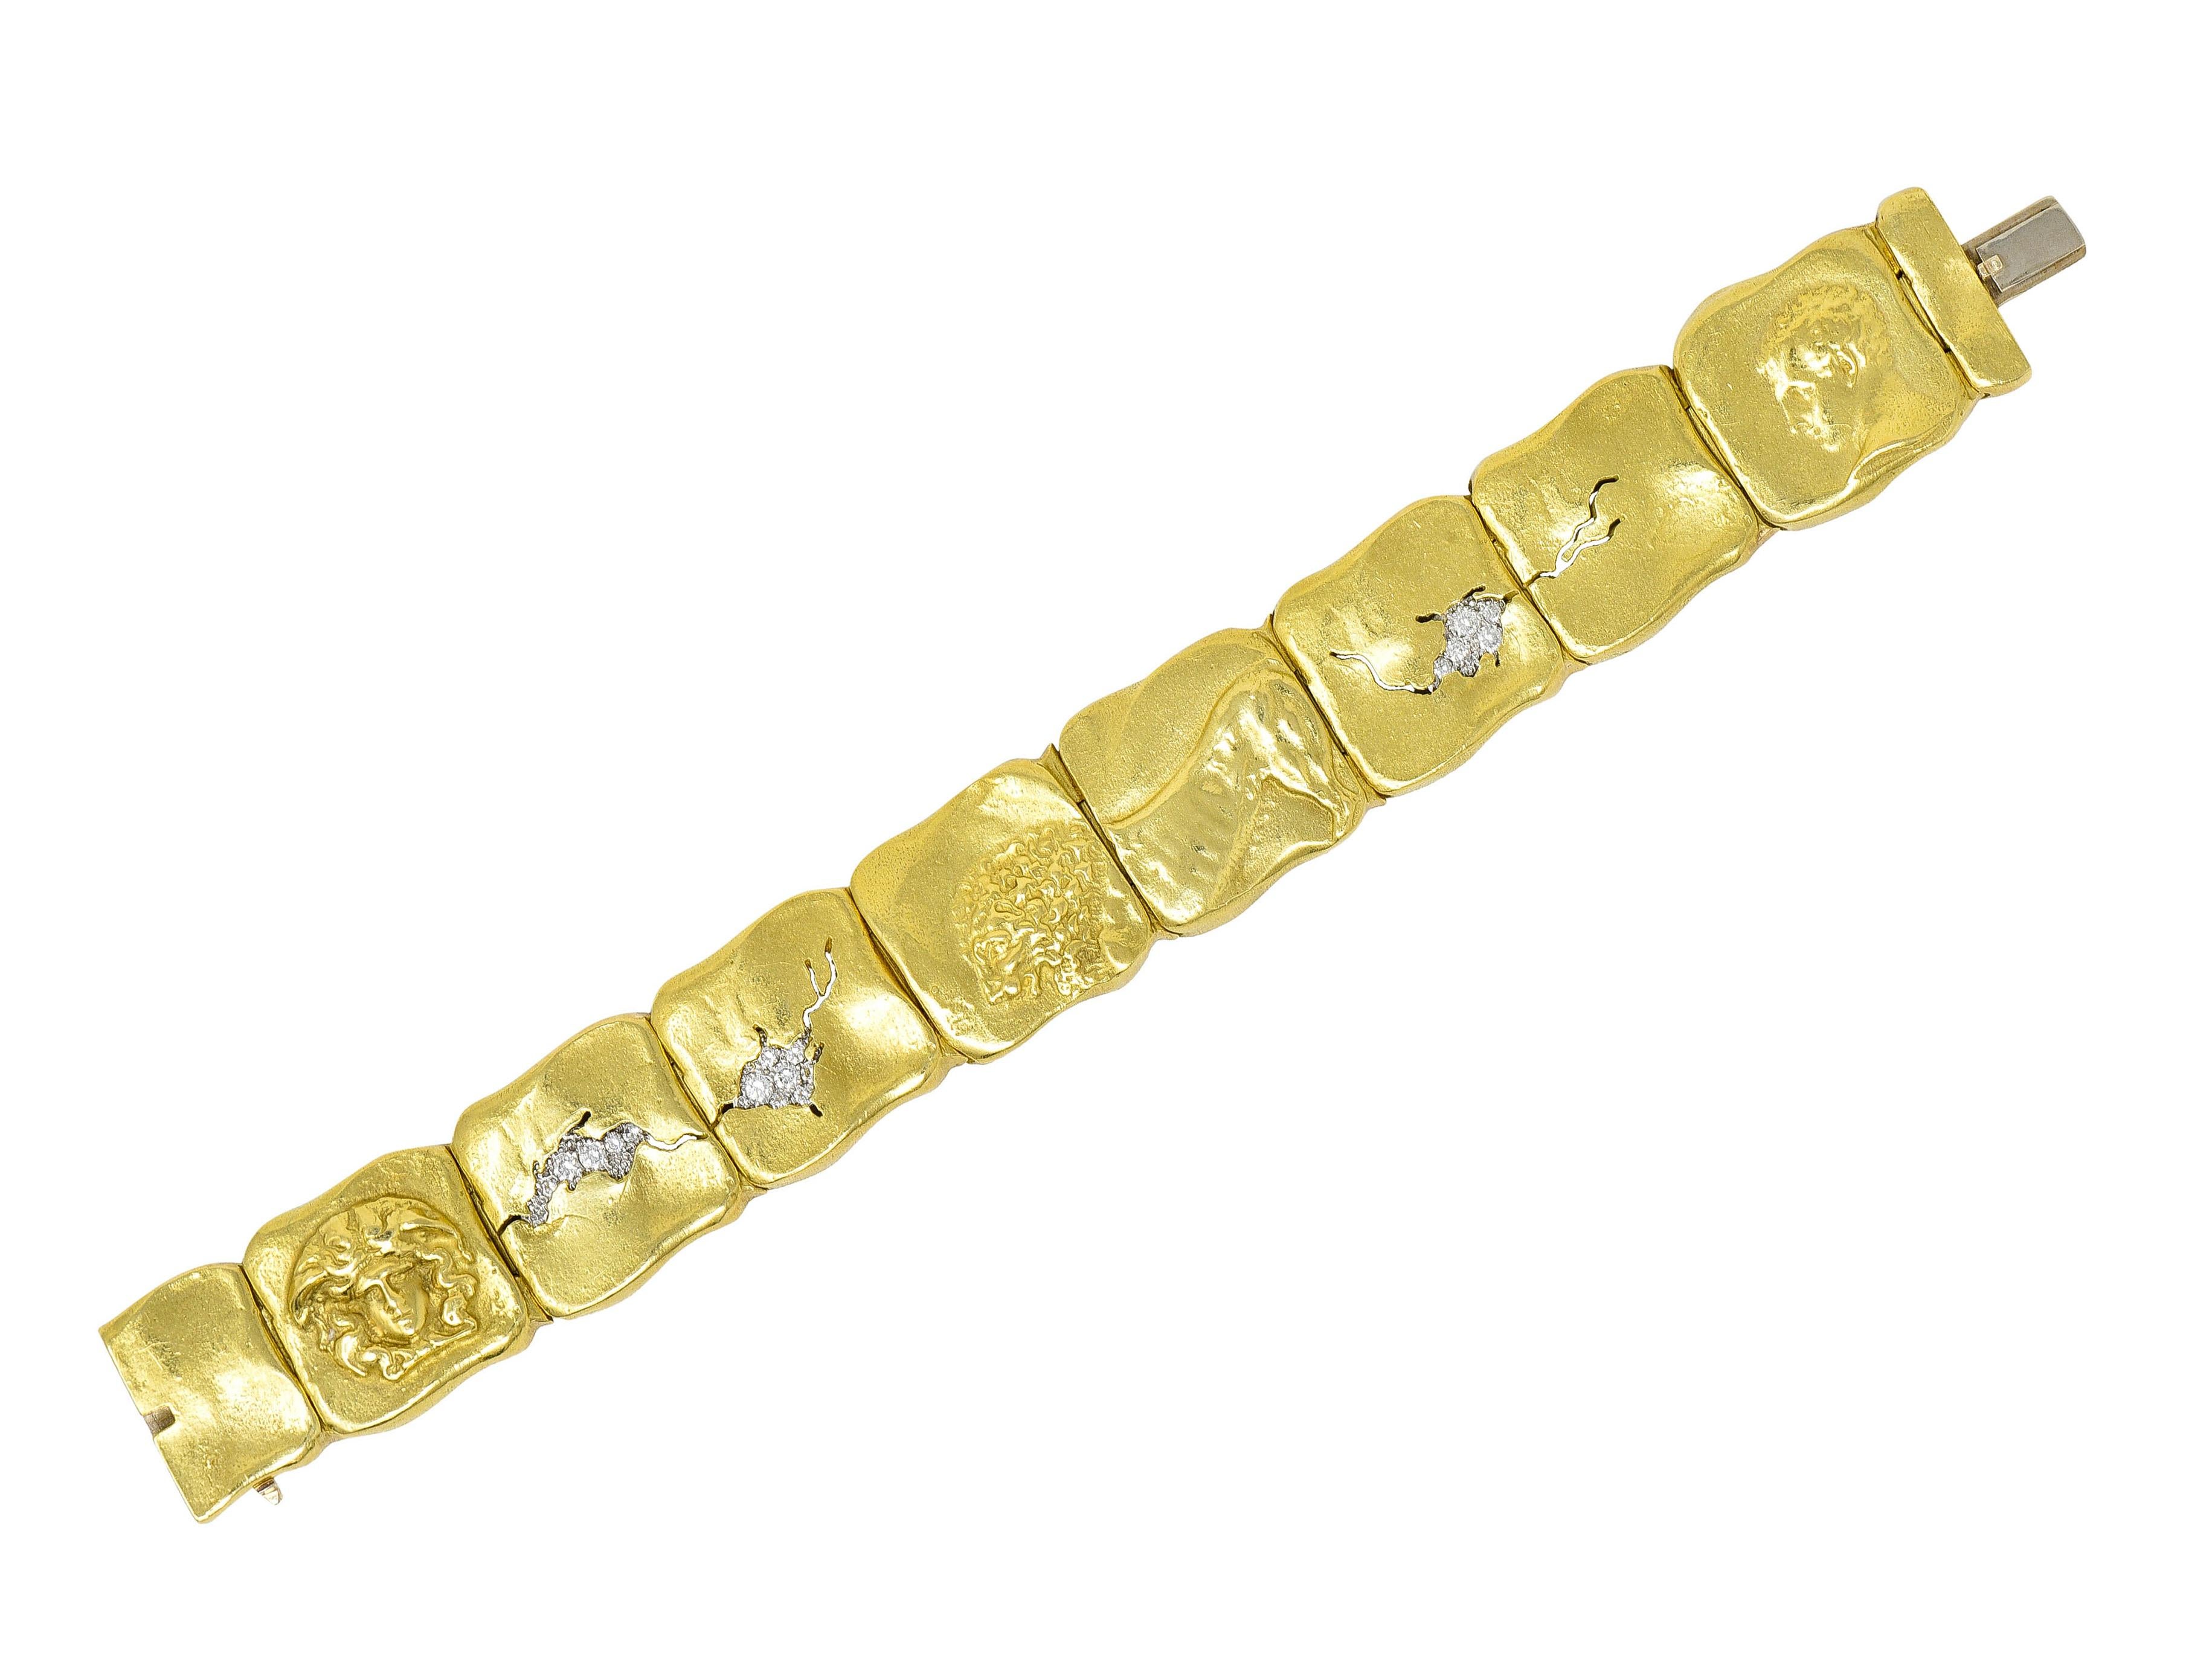 Link bracelet is comprised of cushion style links

Organic in form with semi-matte finish

Crafted to depict burgeoning cracks - exposing pavè set round brilliant cut diamonds

Weighing in total approximately 0.50 carat with G/H color with VS